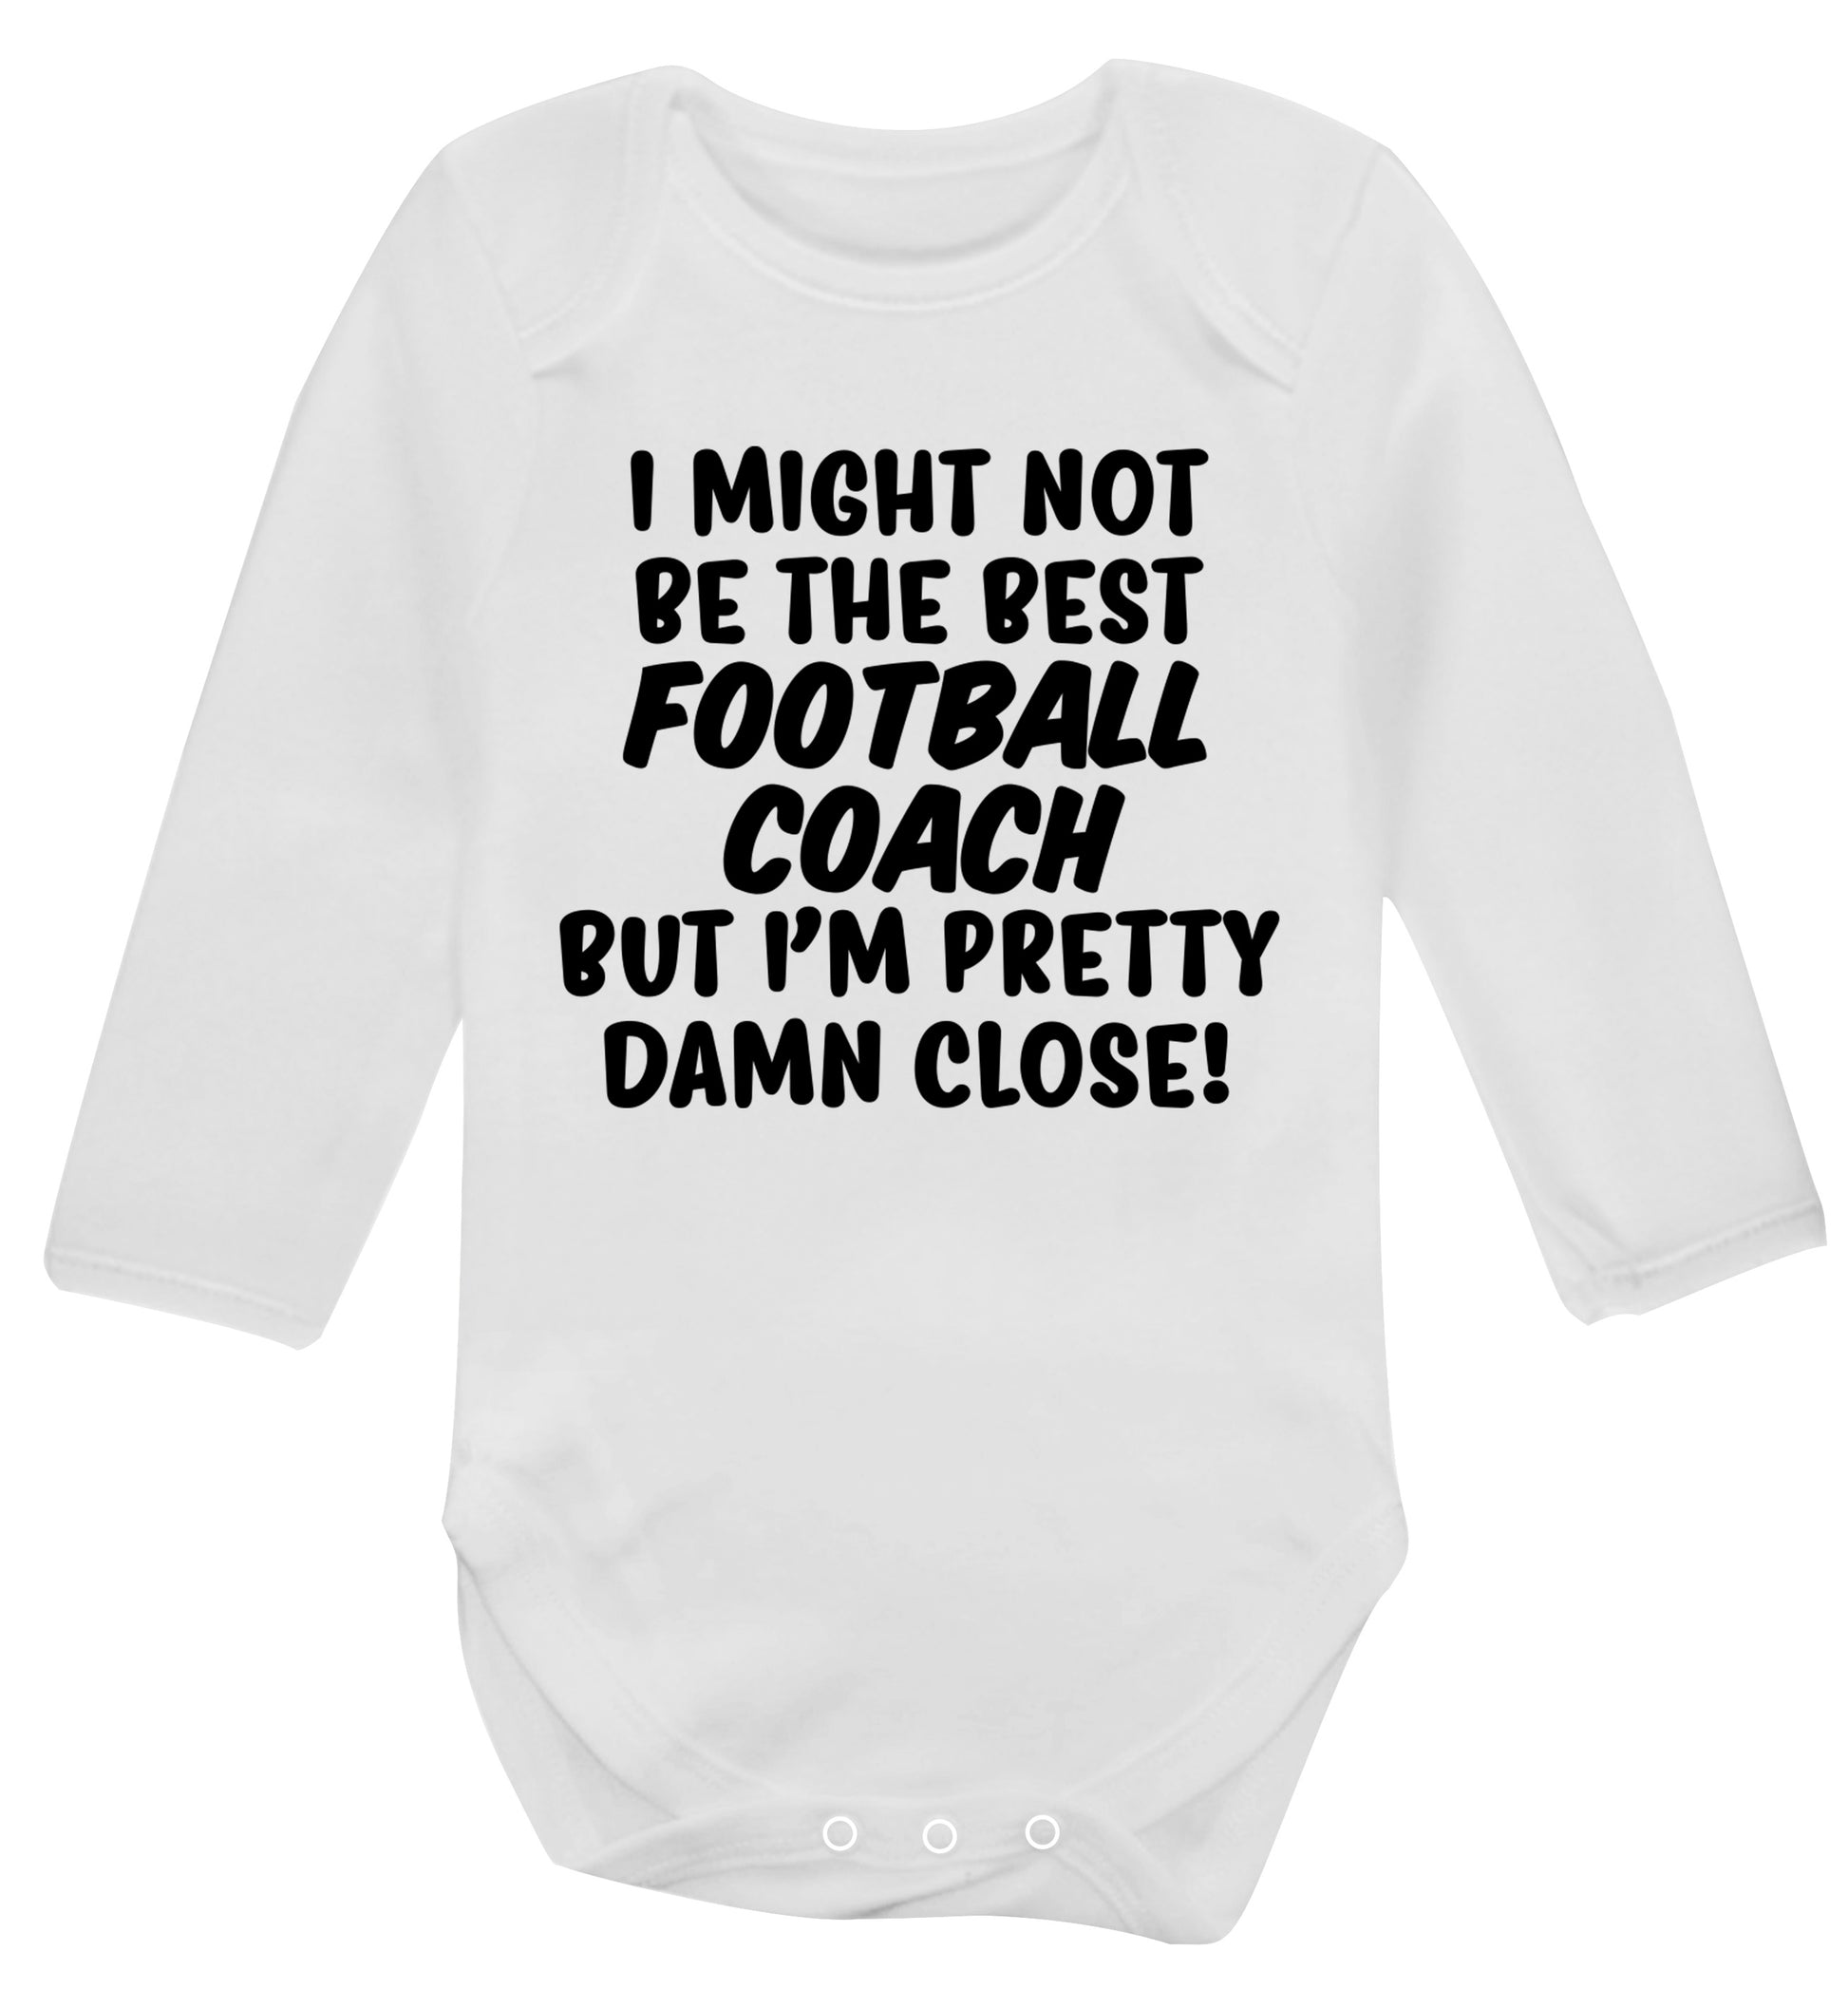 I might not be the best football coach but I'm pretty close! Baby Vest long sleeved white 6-12 months